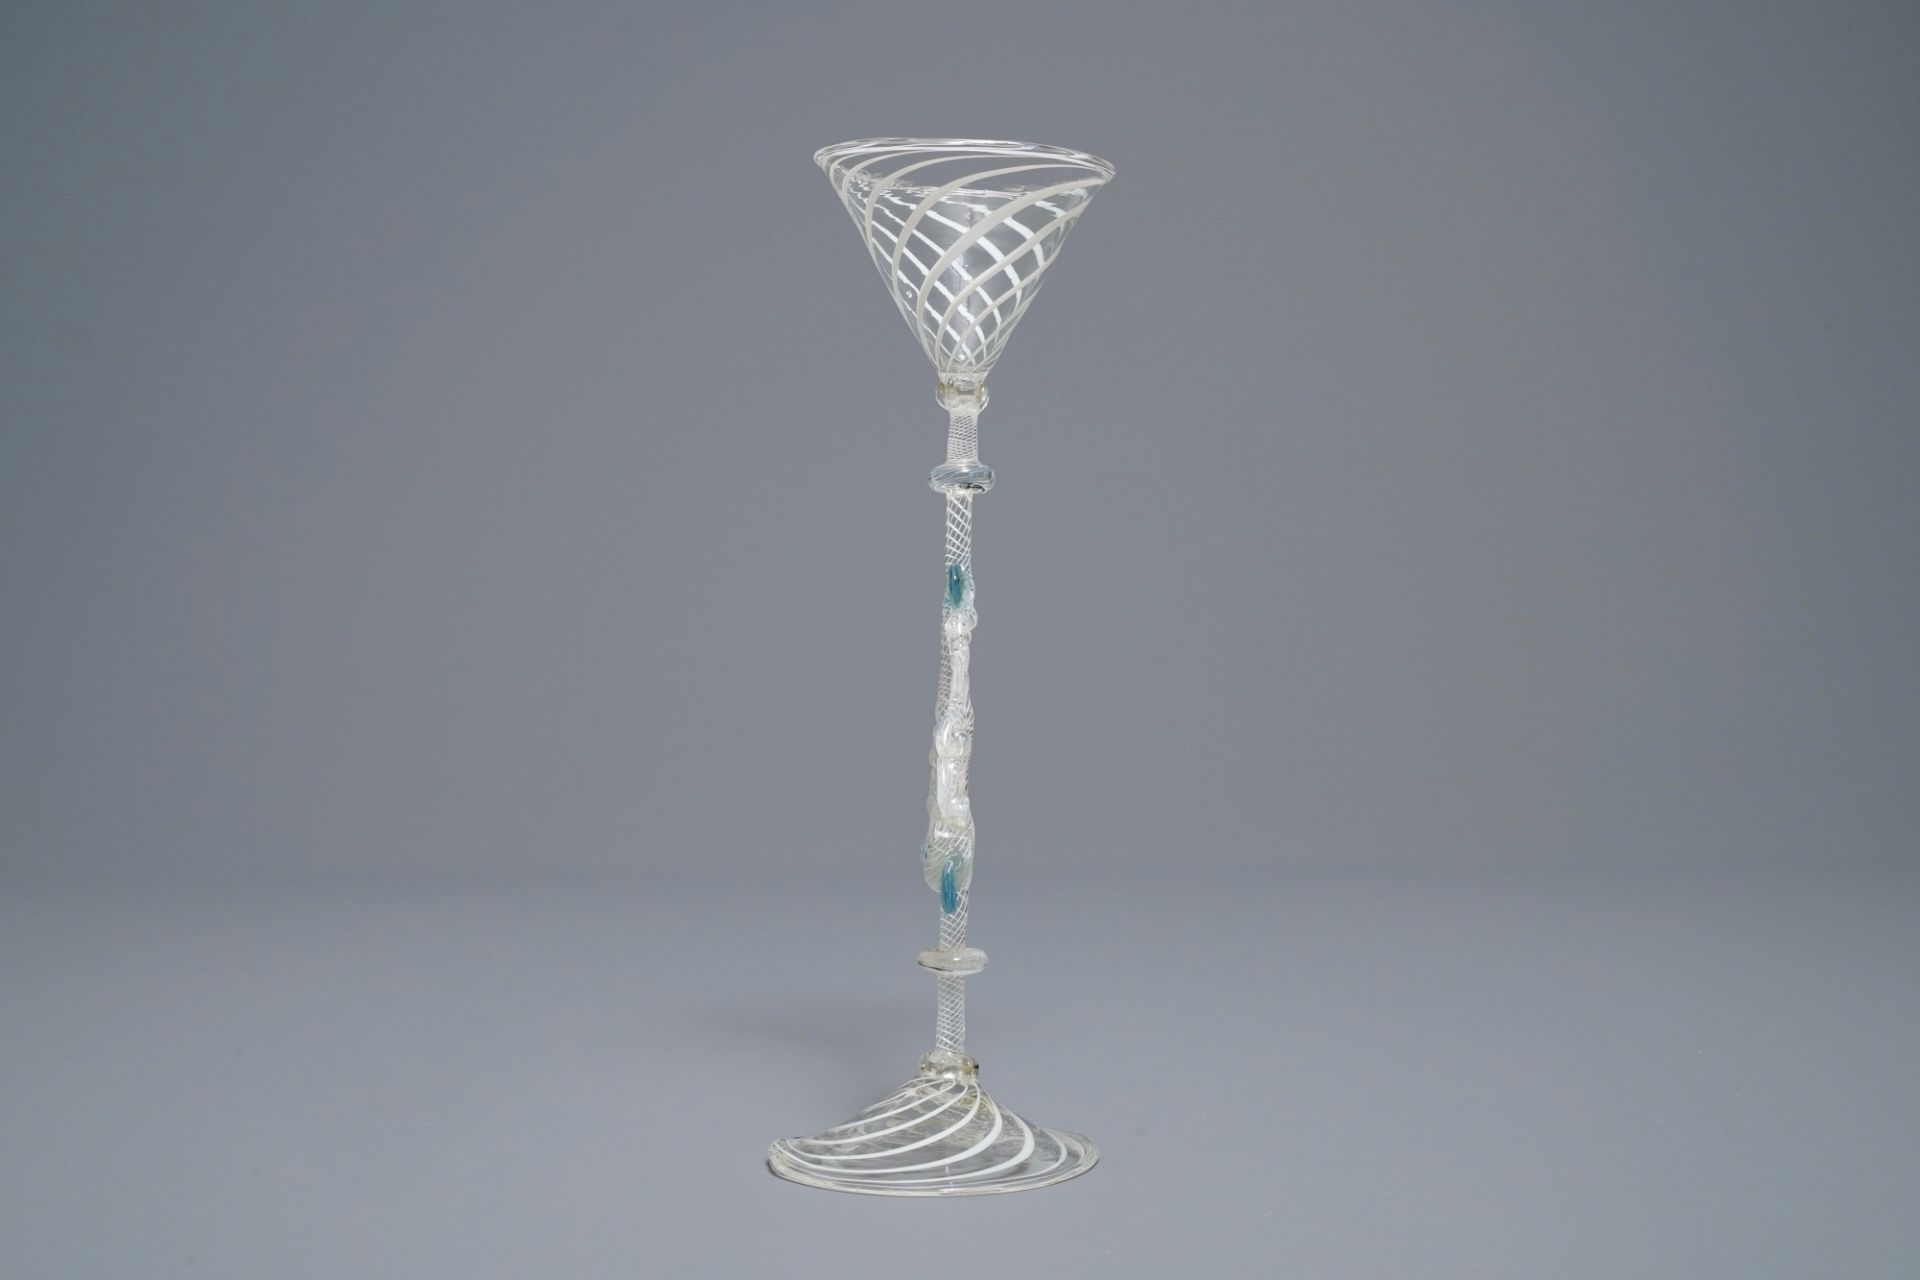 A façon de Venise winged wine glass, Italy or Holland, 18/19th C. - Image 2 of 6